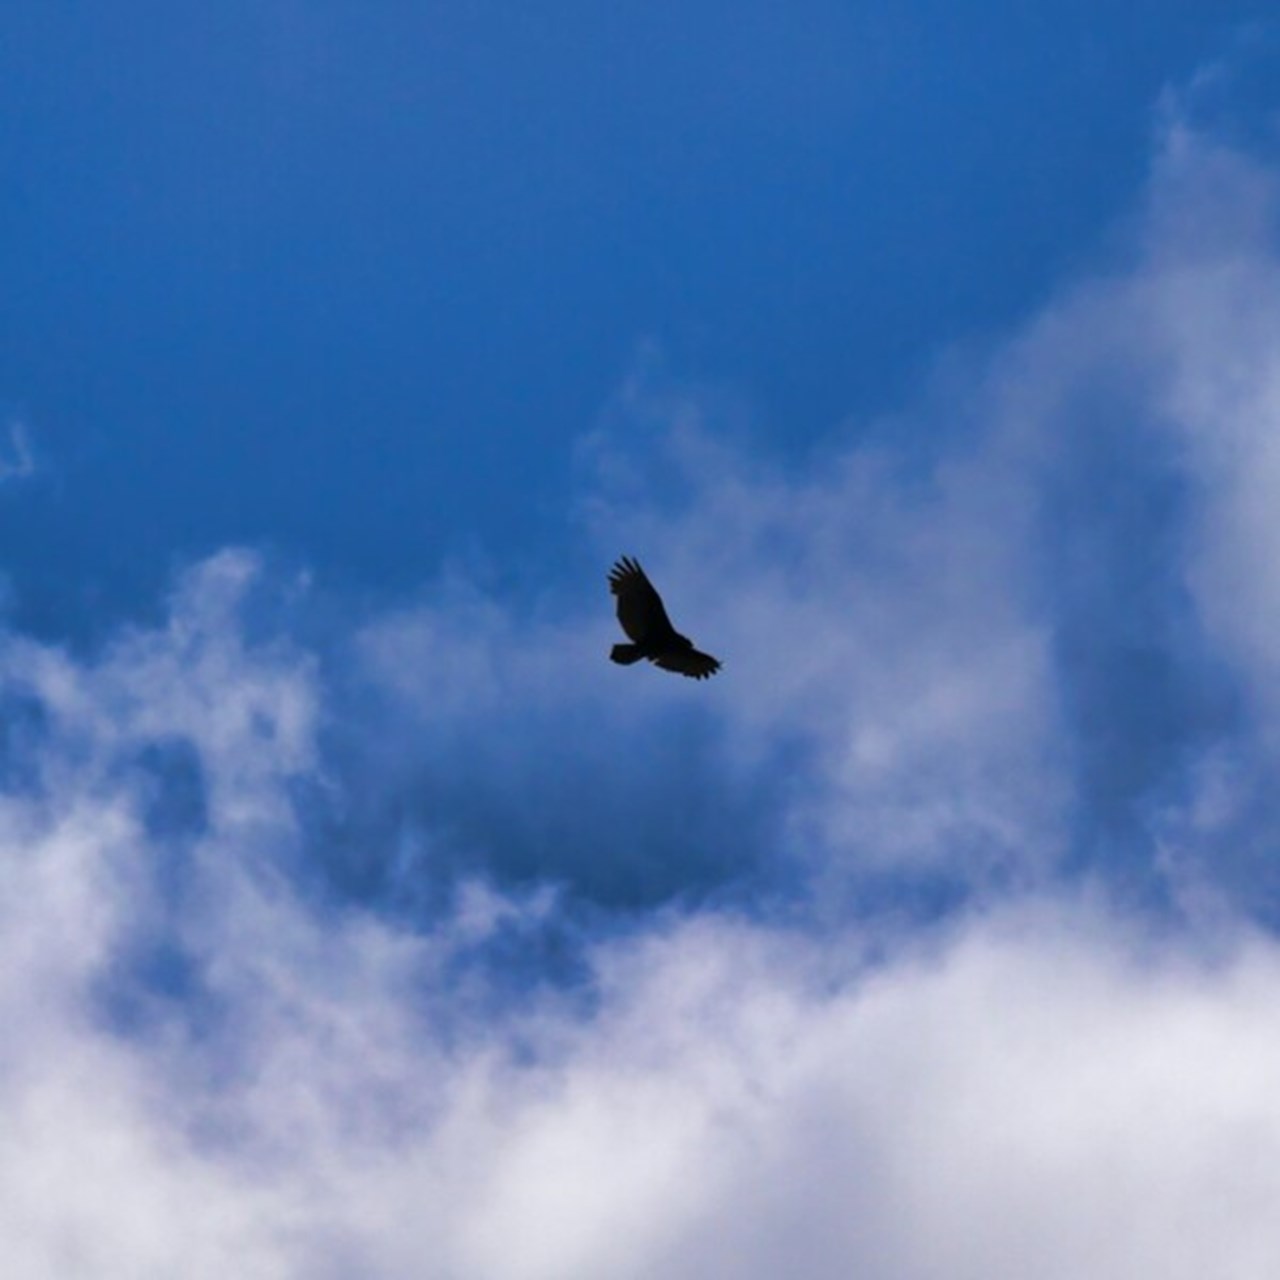 A black bird hovers in the blue sky among white clouds